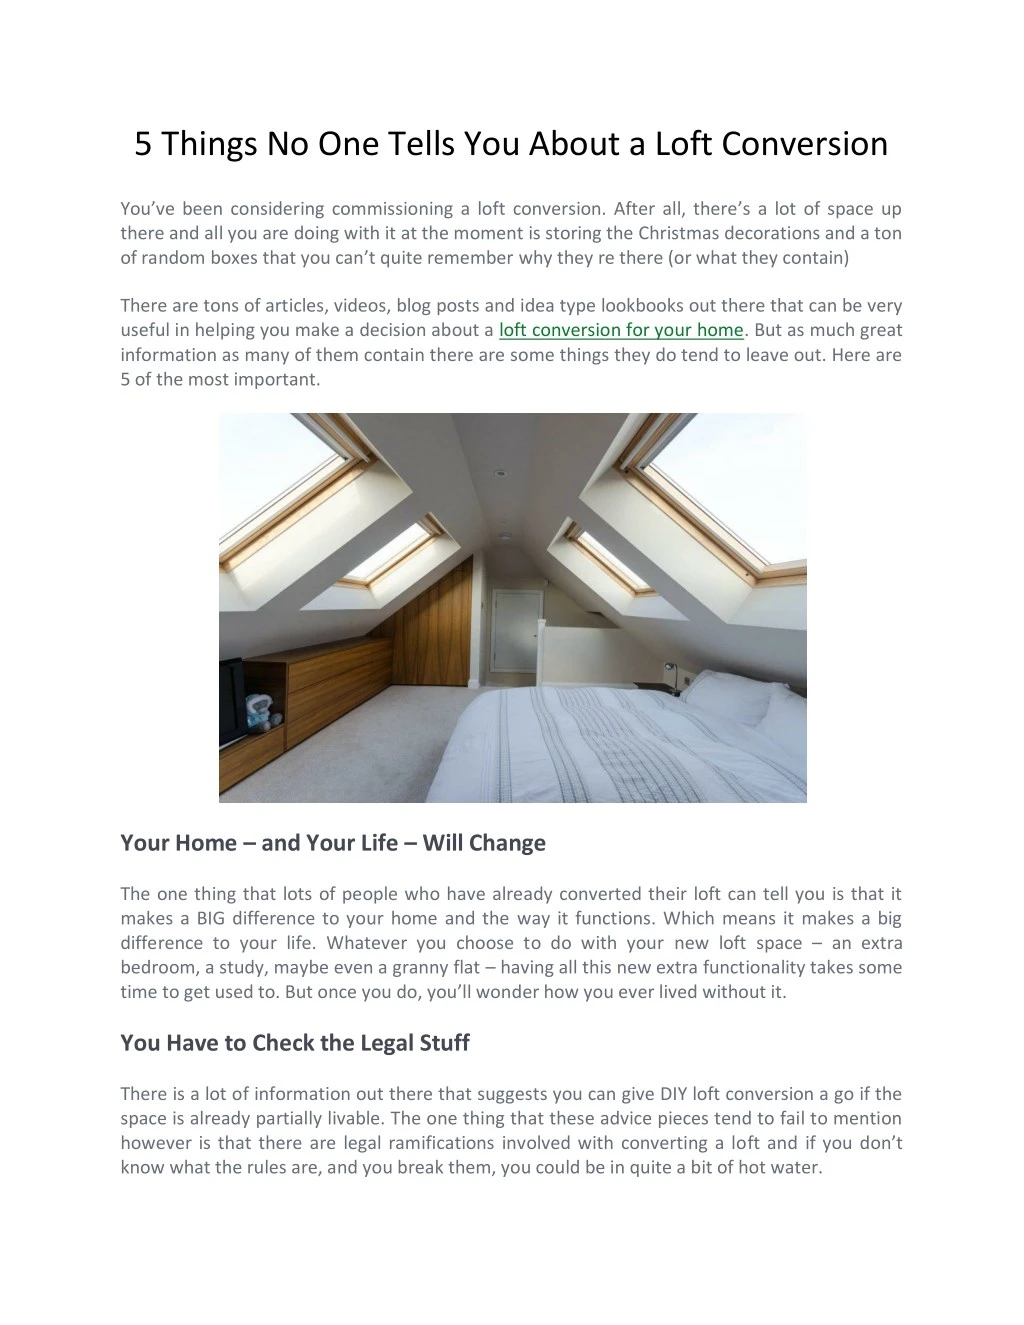 5 things no one tells you about a loft conversion